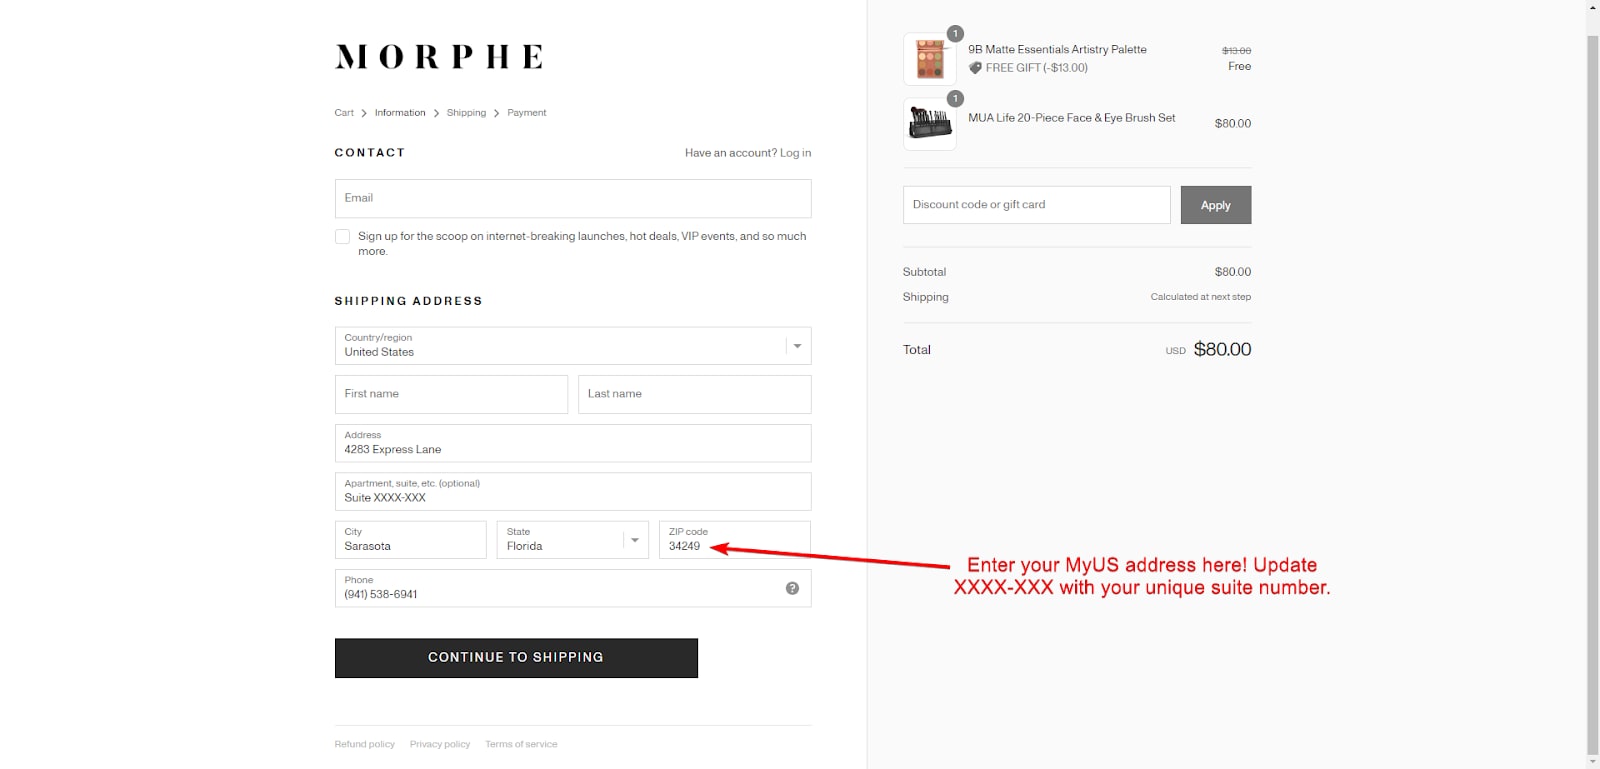 Add MyUS Address to Morphe Guest Checkout